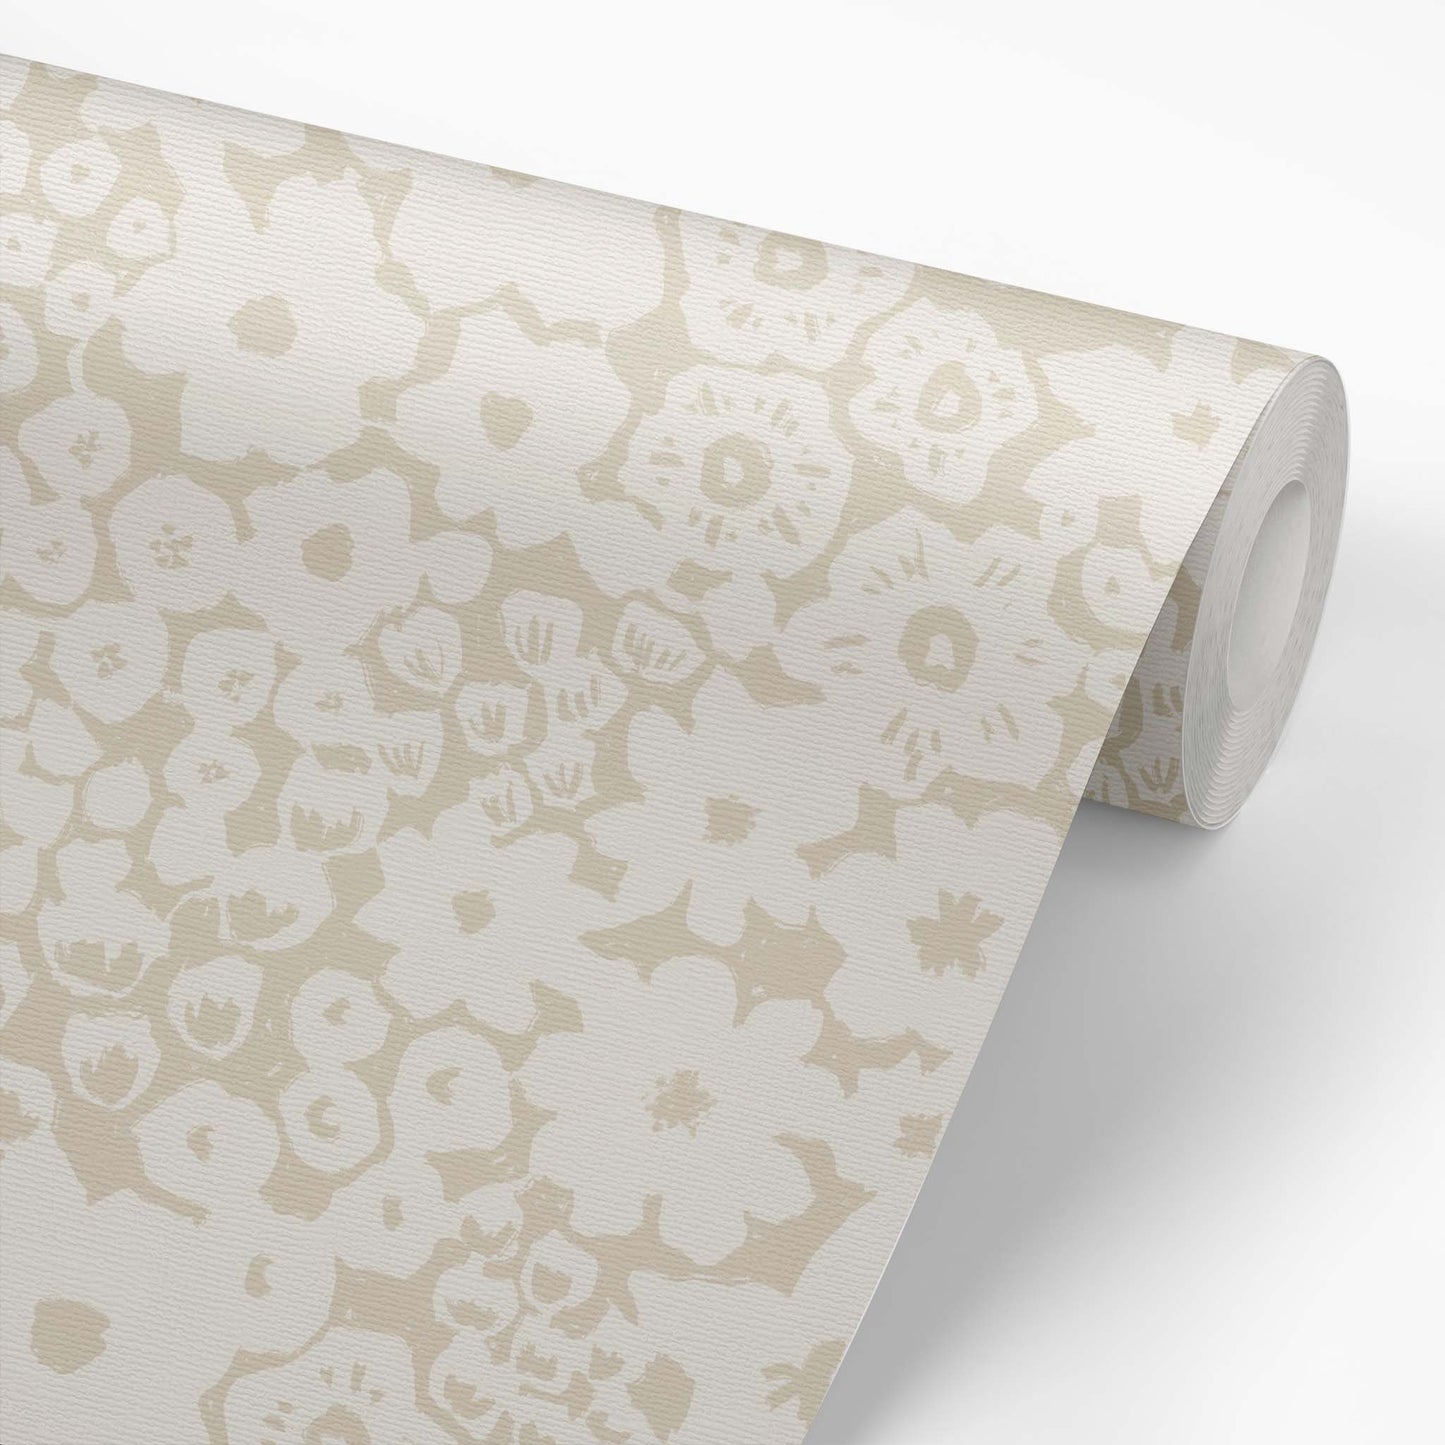 Wallpaper panel featuring Iris + Sea Leah Simple Floral- Sand Peel and Stick Wallpaper - a floral pattern